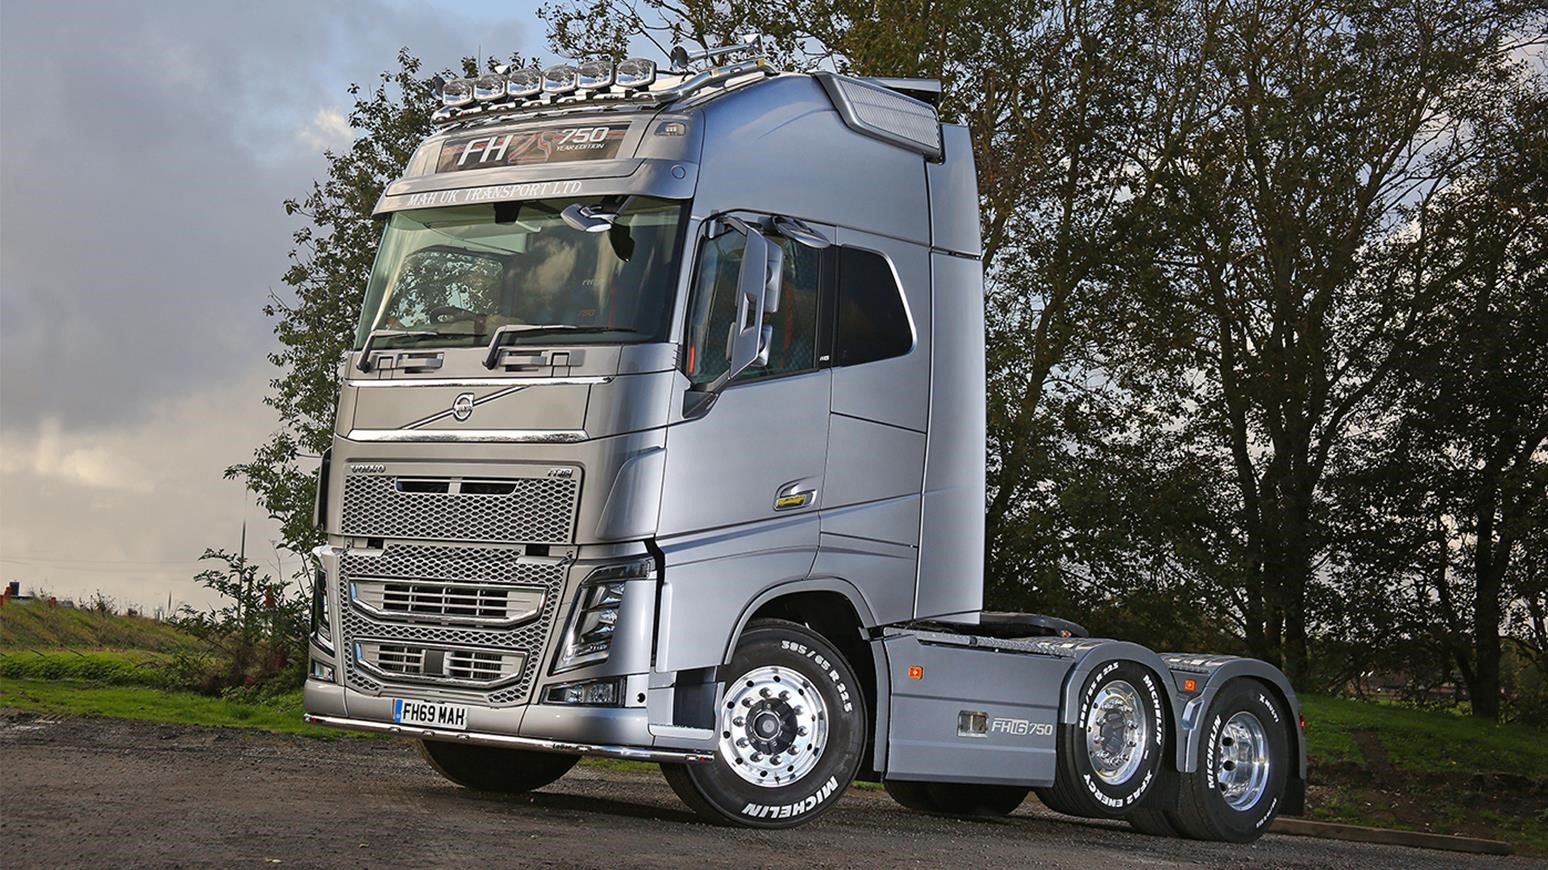 London-Based MAH UK Transport Ltd Adds Volvo FH16 750 25 Year Special Edition Tractor Unit To Its Fleet